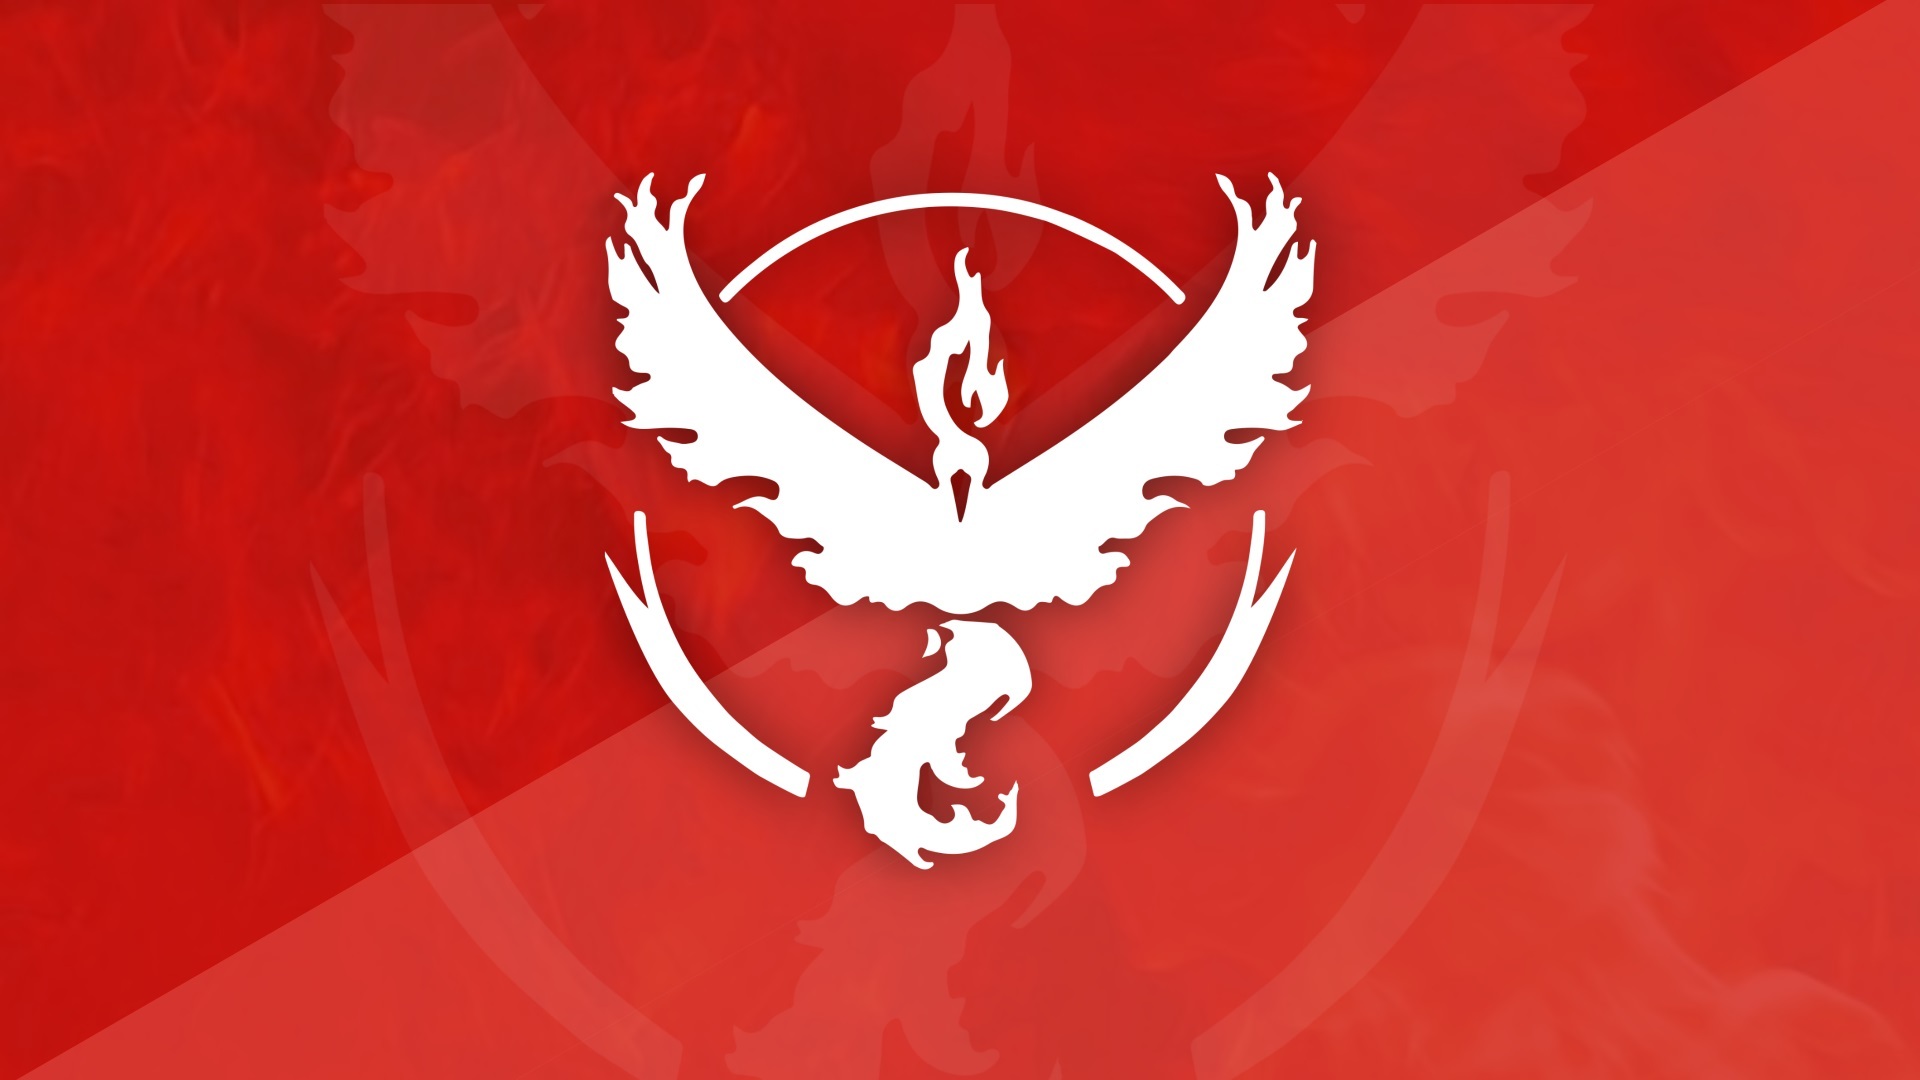 Red Team Valor by Tommaso Tabacchi